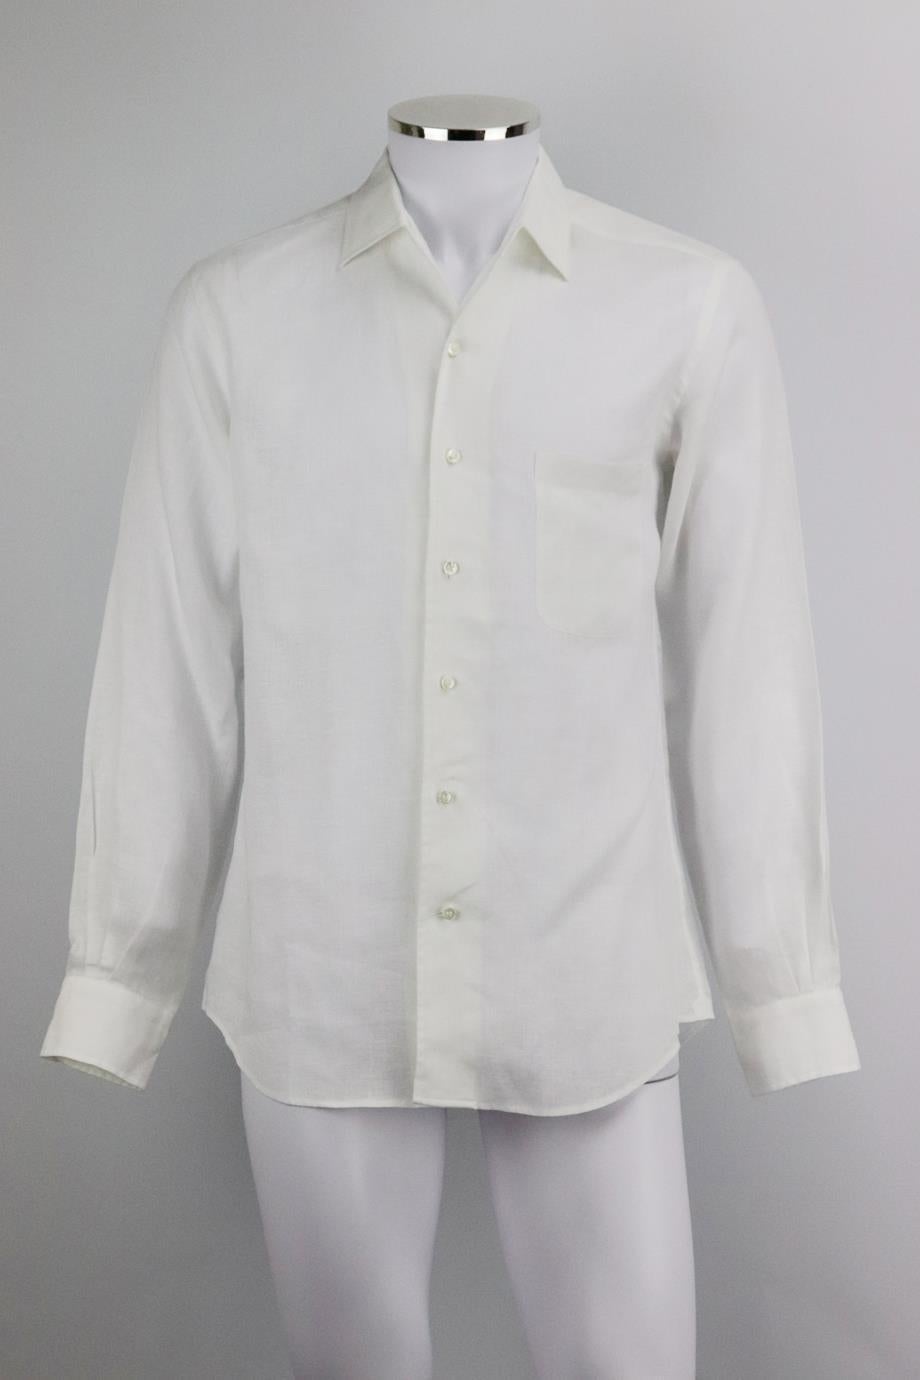 Loro Piana men’s linen shirt. White. Long sleeve, v-neck. Button fastening at front. 100% Linen. Size: Medium (IT 48, UK/US Chest 38, UK/US Collar 15.5). Shoulder to shoulder: 18 in. Chest: 41 in. Waist: 39 in. Hips: 42 in. Length: 30 in. Sleeve